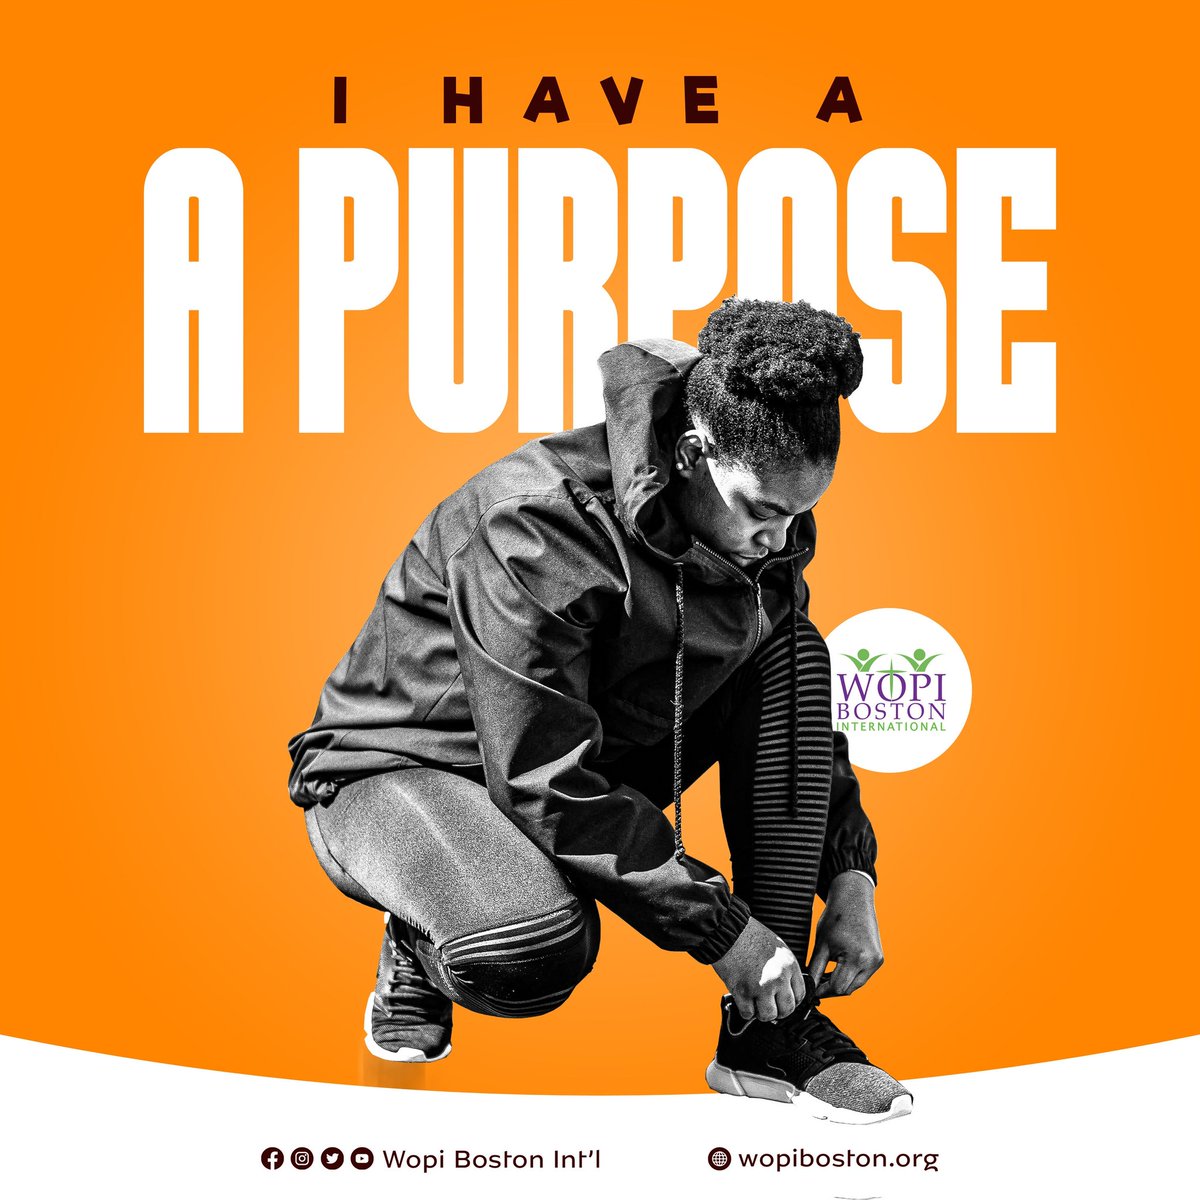 WOPI Boston empowers individuals to discover their God-given purpose and become the leader they were meant to be.

Join us and make a positive impact on your community. 

linktr.ee/wopiboston

#iHaveAPurpose #WOPIBoston #PurposeDriven #EmpoweredByFaith